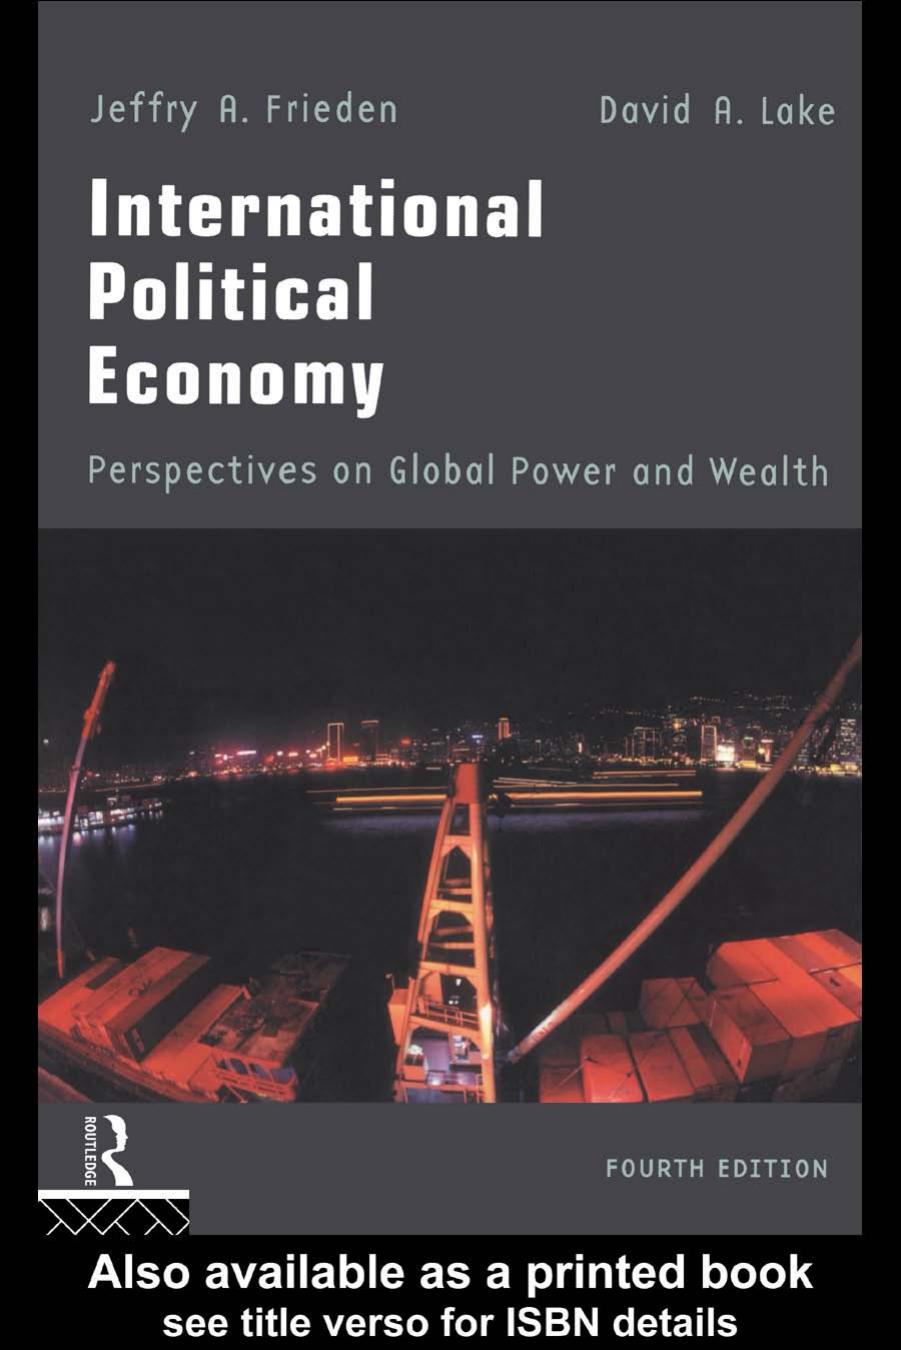 International Political Economy: Perspectives on Global Power and Wealth, Fourth Edition